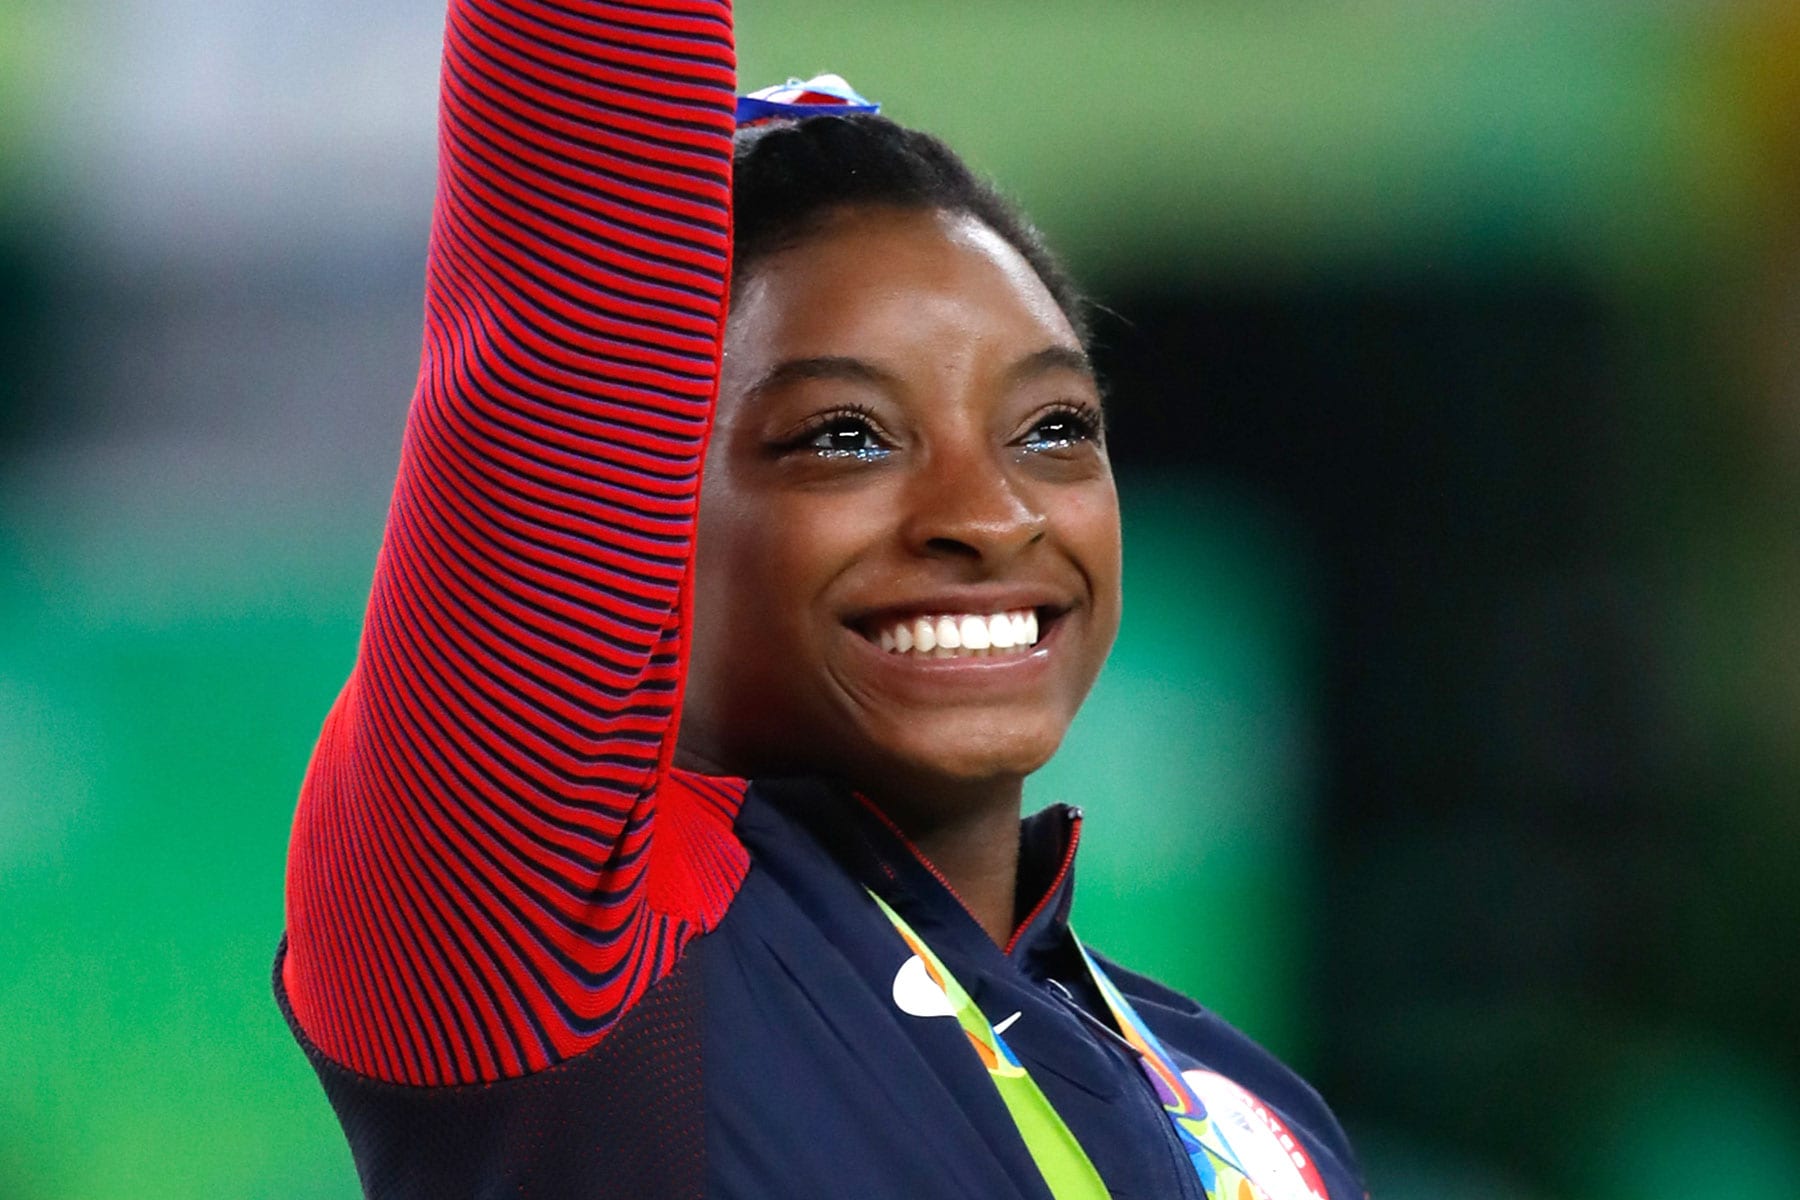 Simone Biles Cleared to Compete, Wins Bronze in Balance Beam